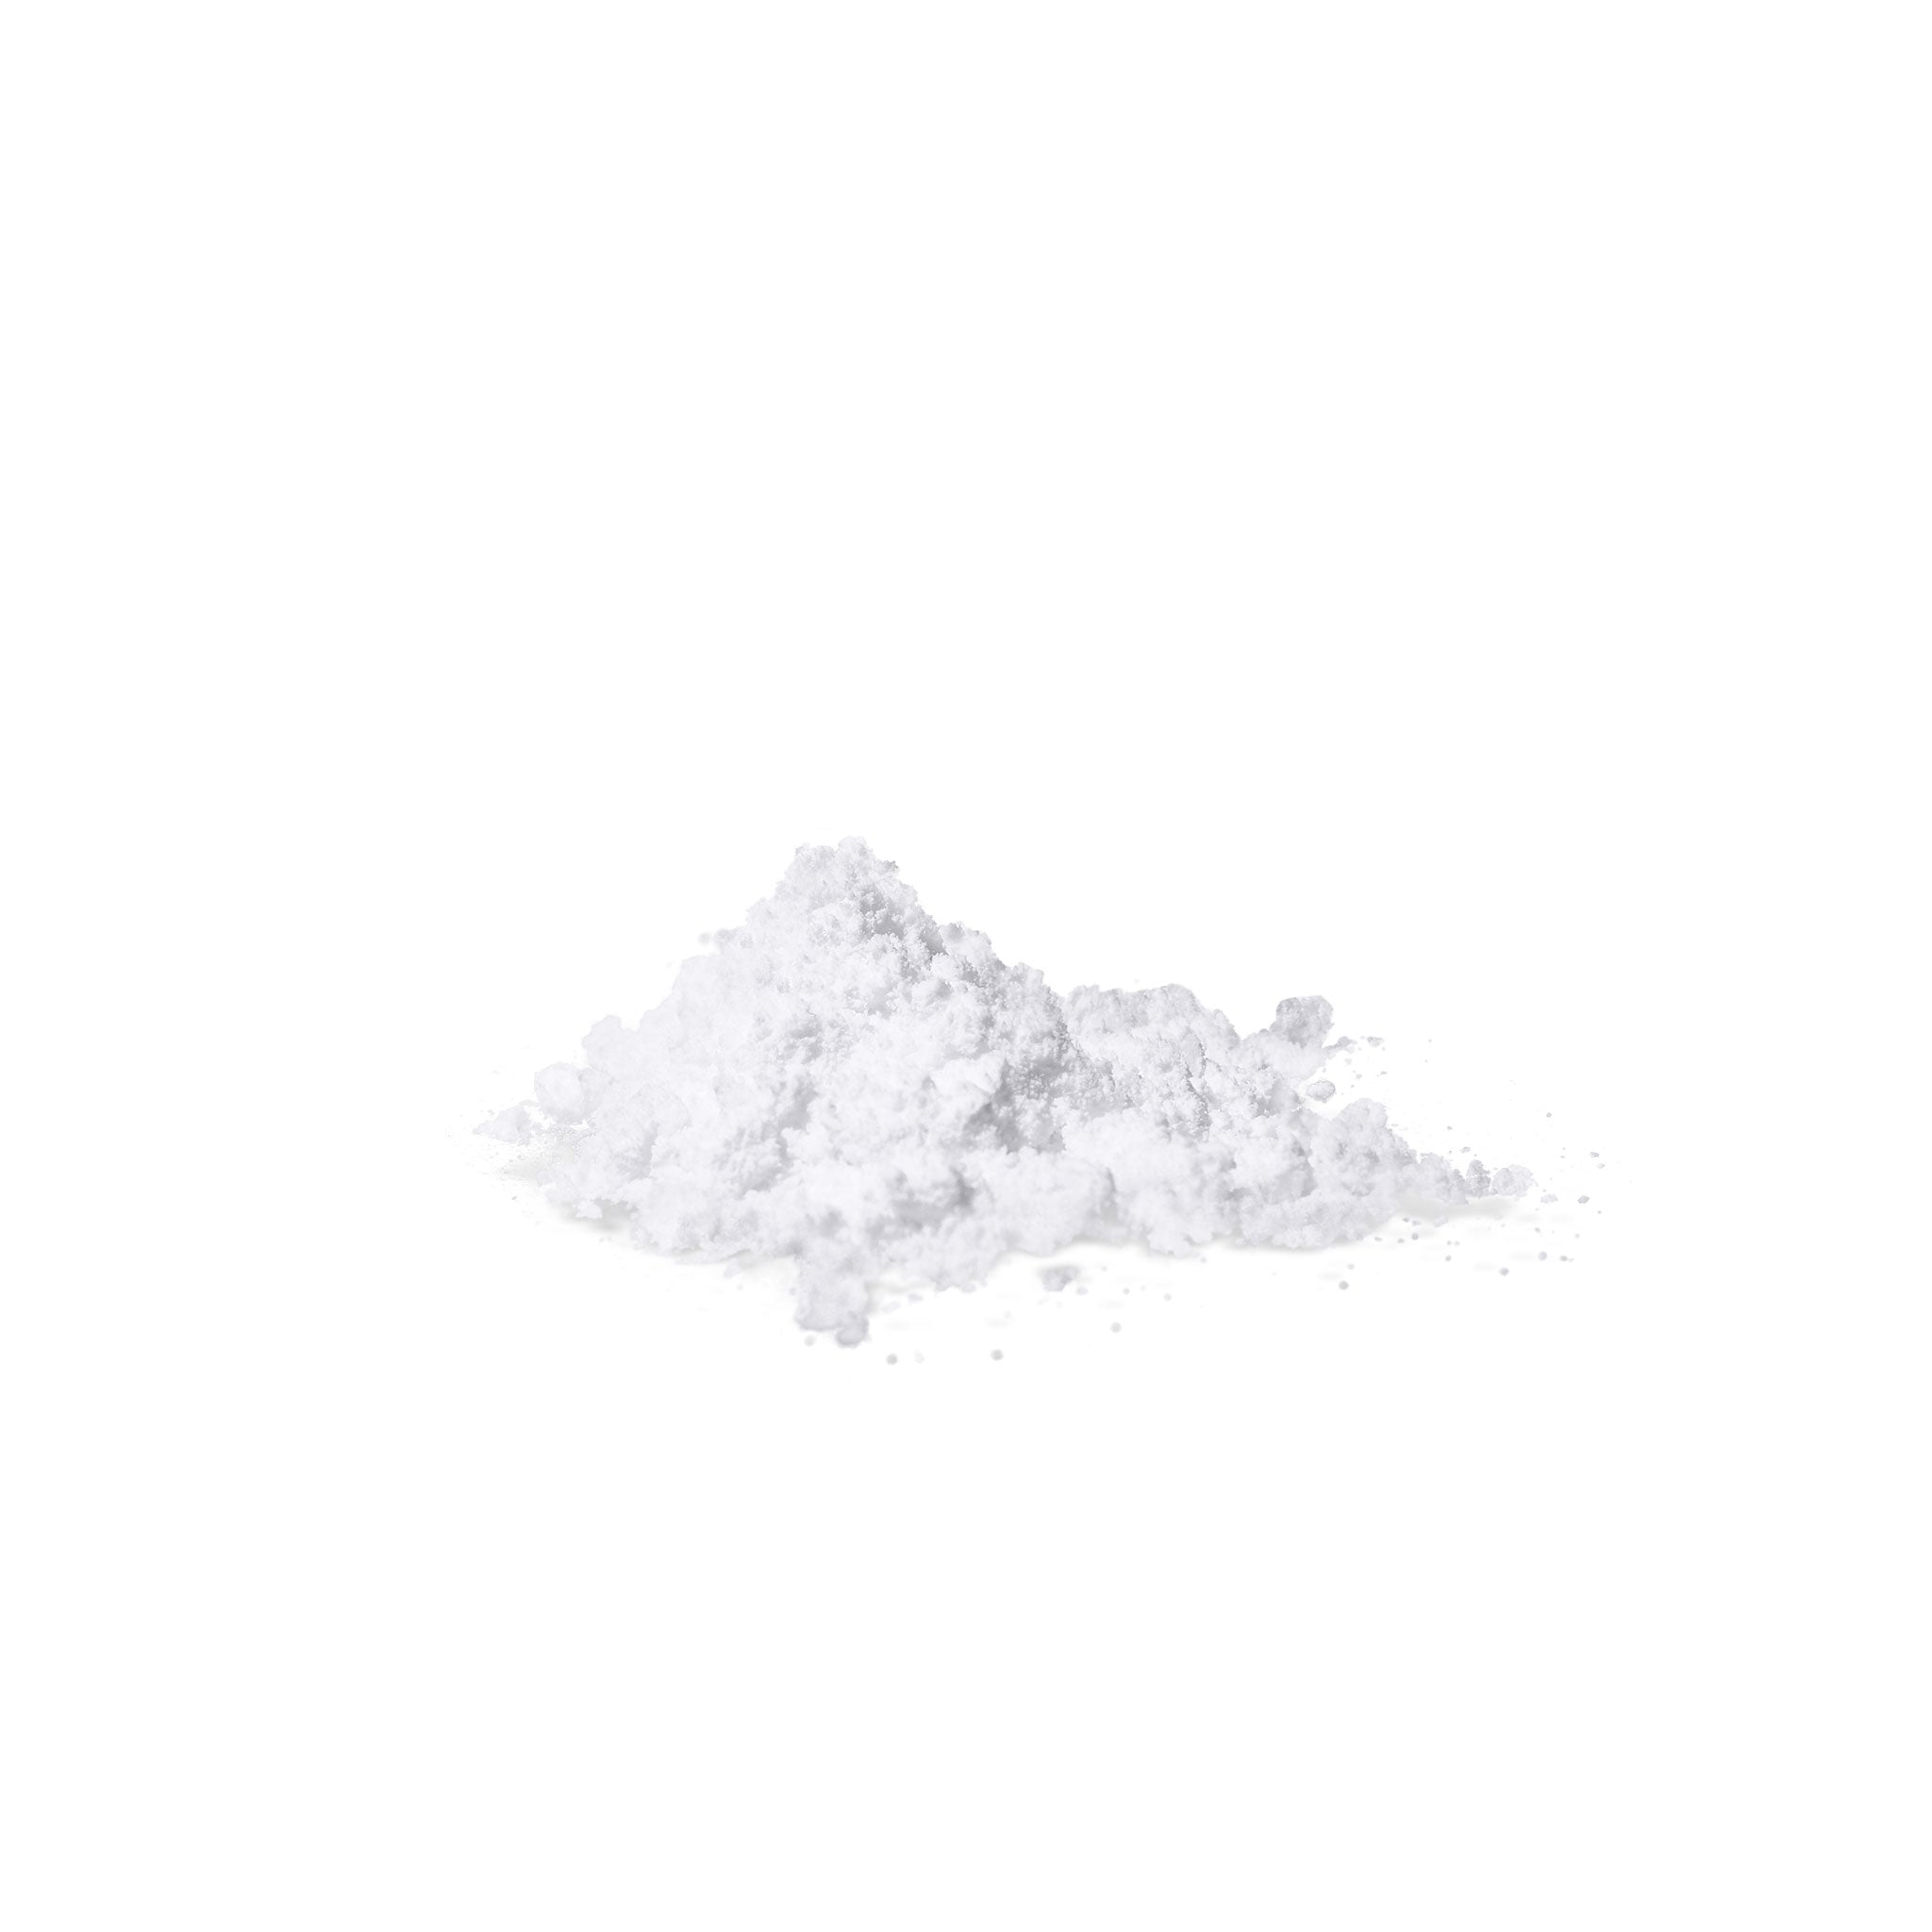 Magtein powder only - absolutely no fillers - 120 grams (60 servings)